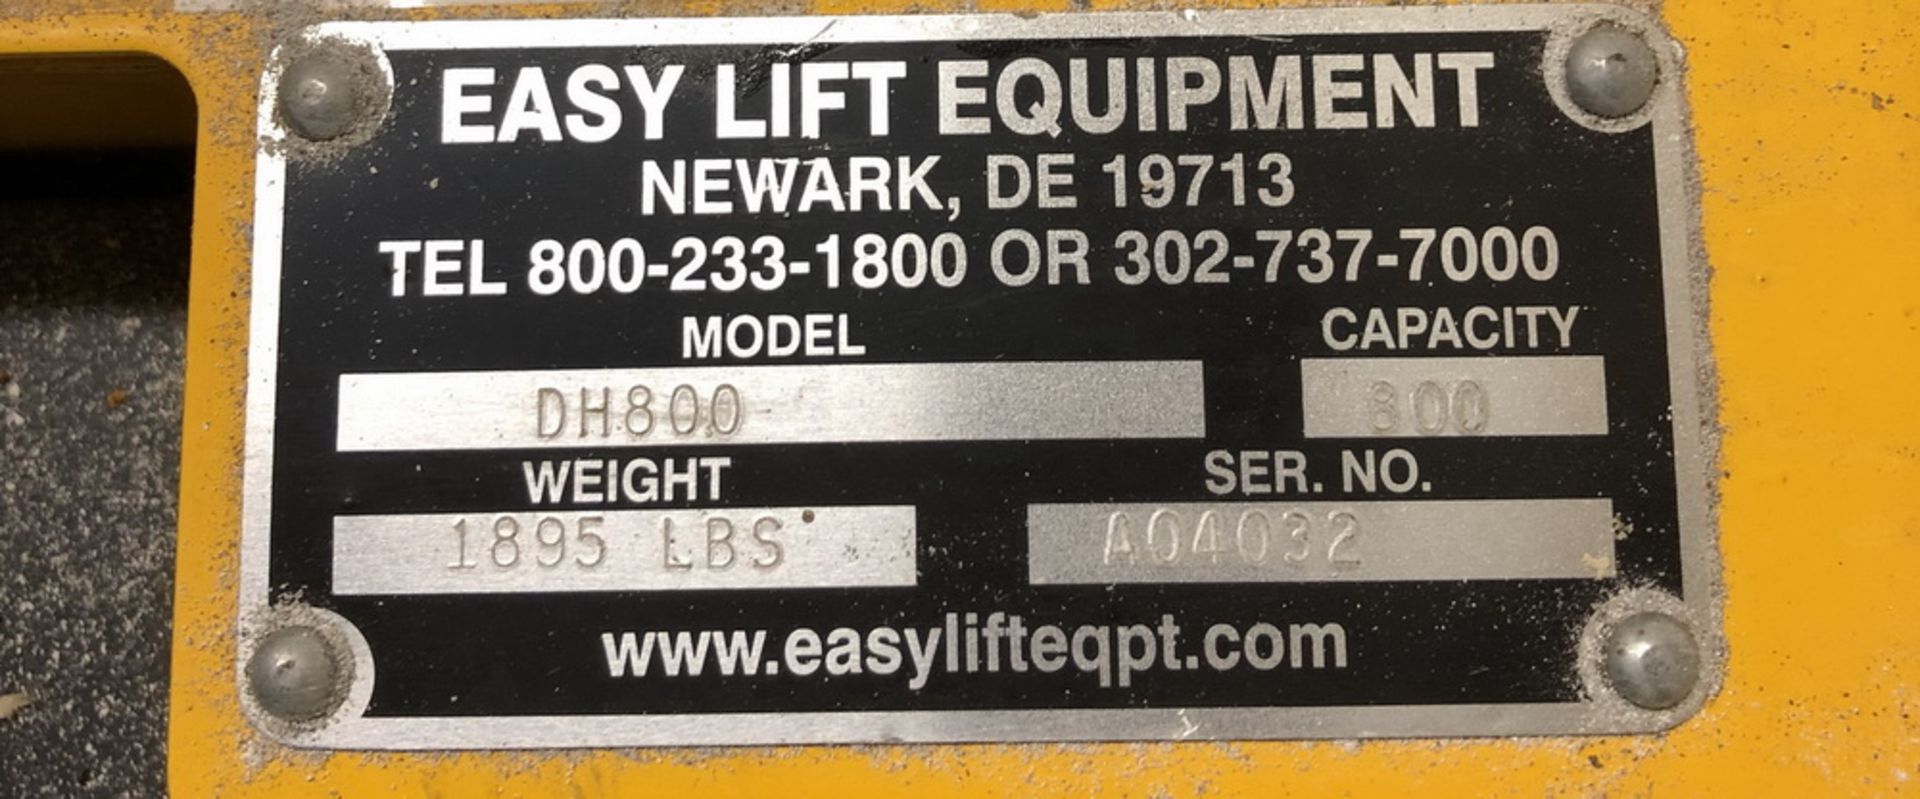 Easy Lift Electric Drum Lift/Transporter, Model DH800, S/N A04032 - Image 3 of 4